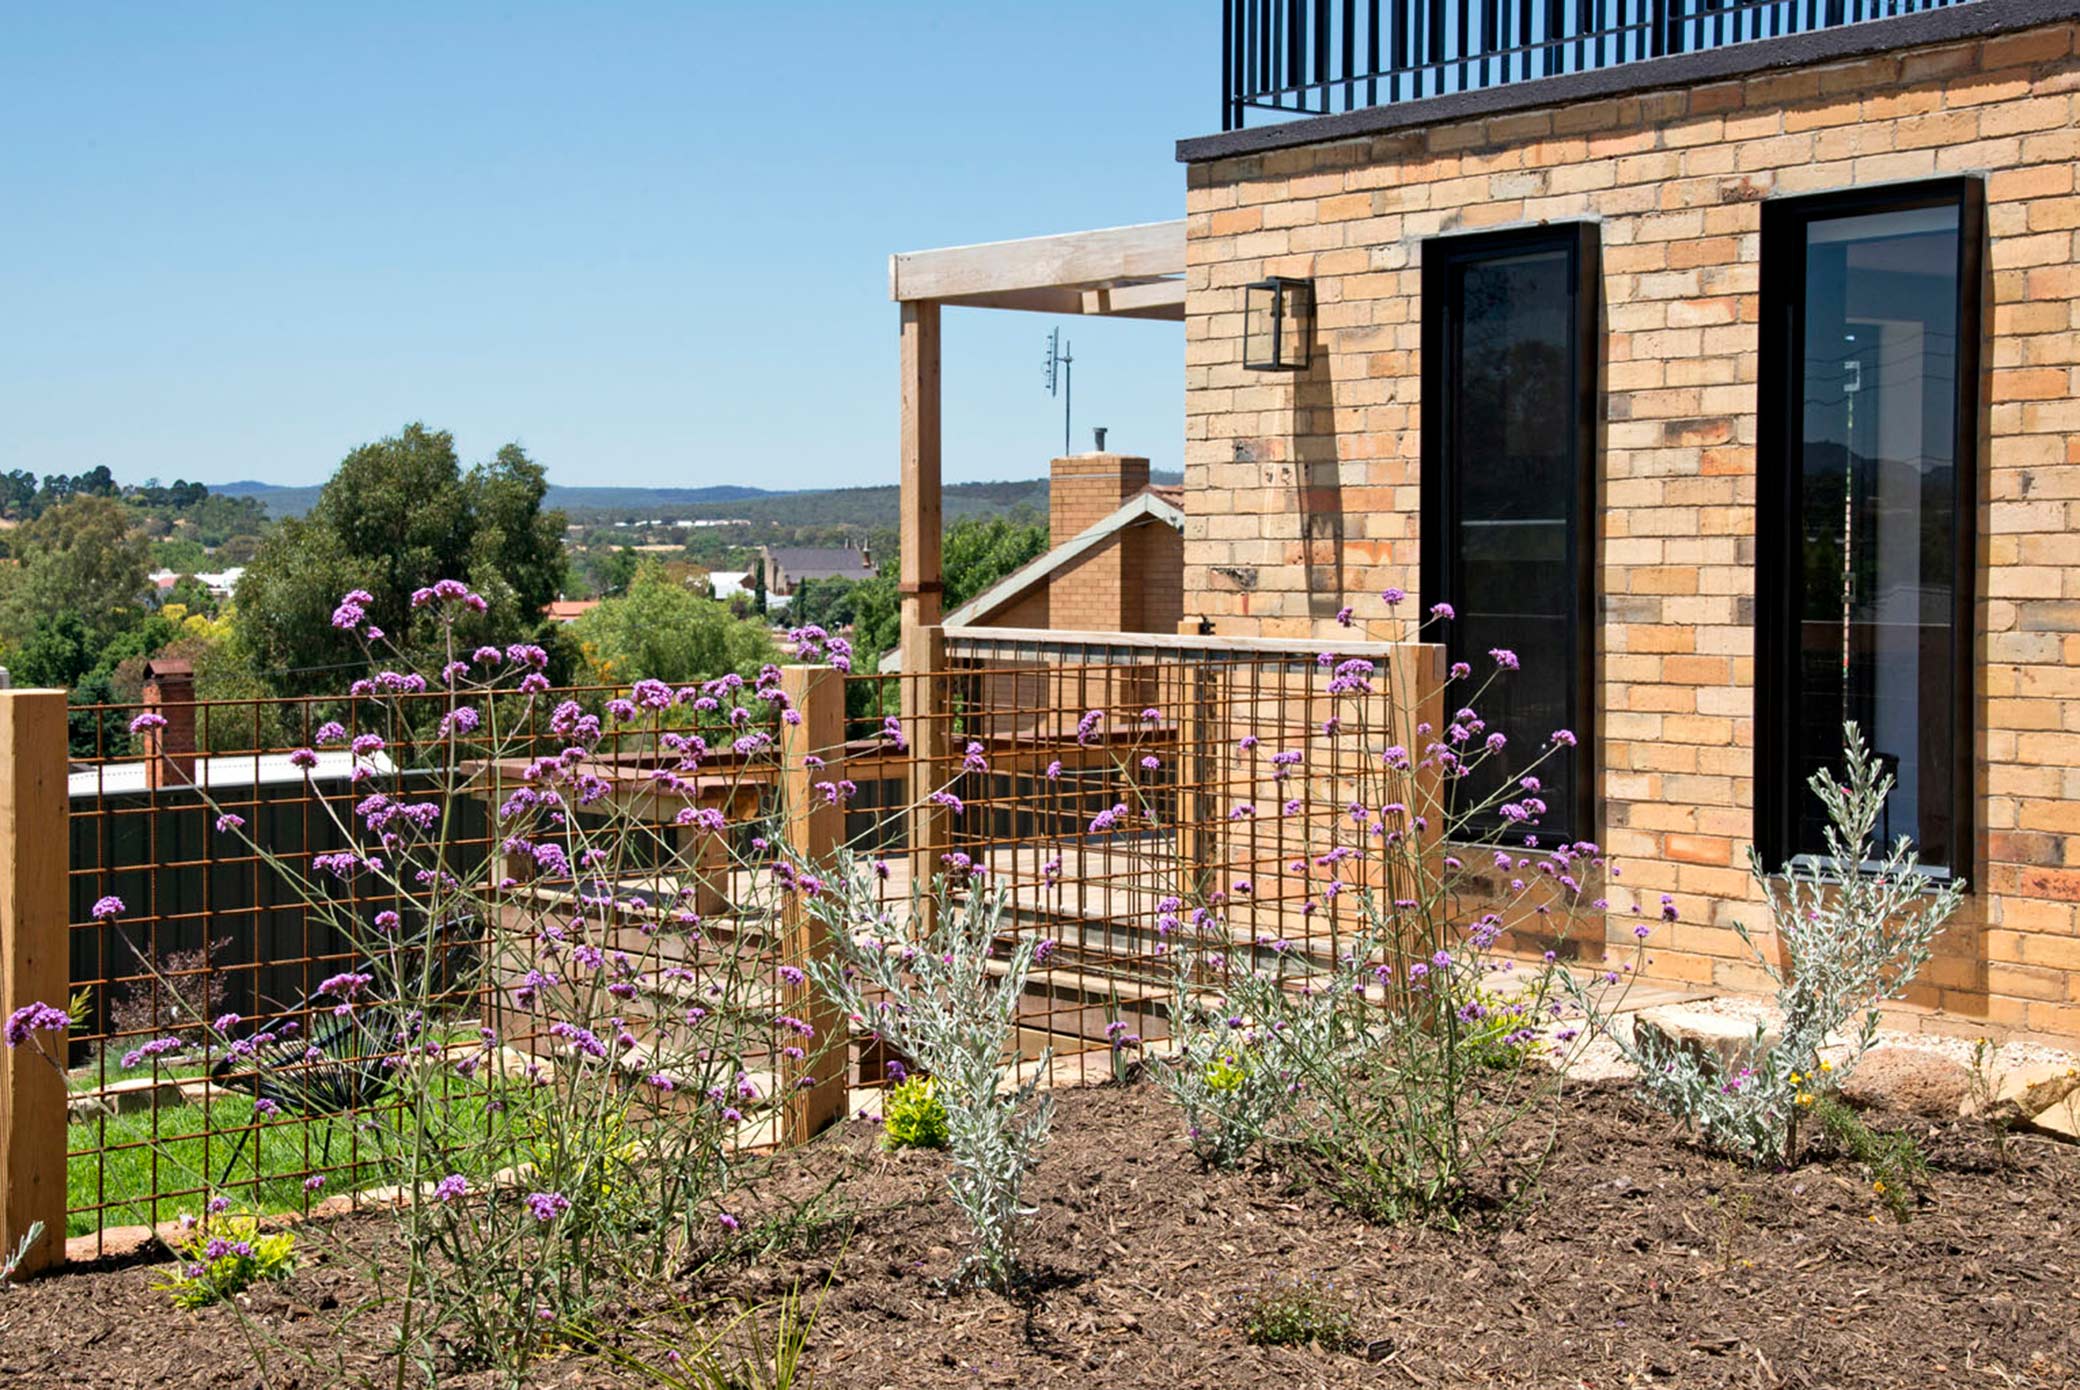 52 Views
Accommodation Castlemaine Victoria
Dog friendly accommodation